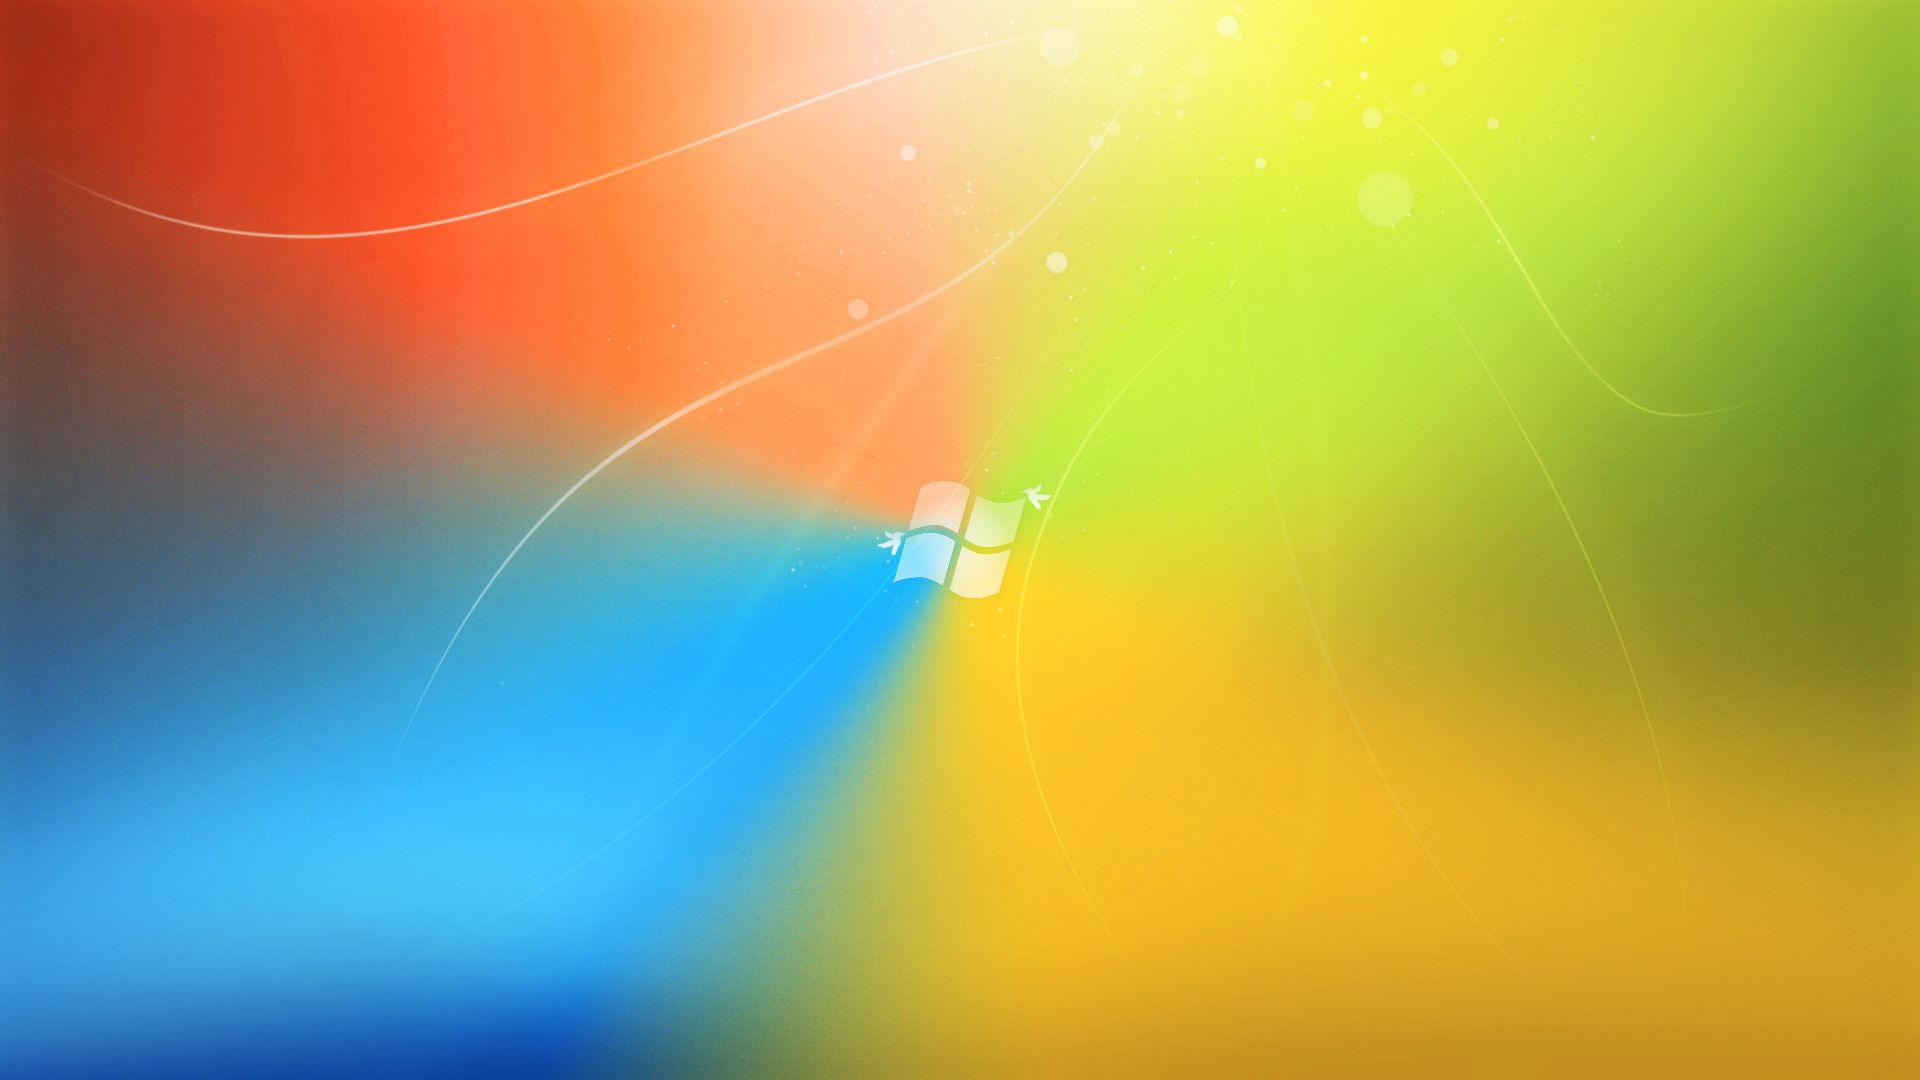 Colorful Windows 7 HD Wallpapers | HD Wallpapers